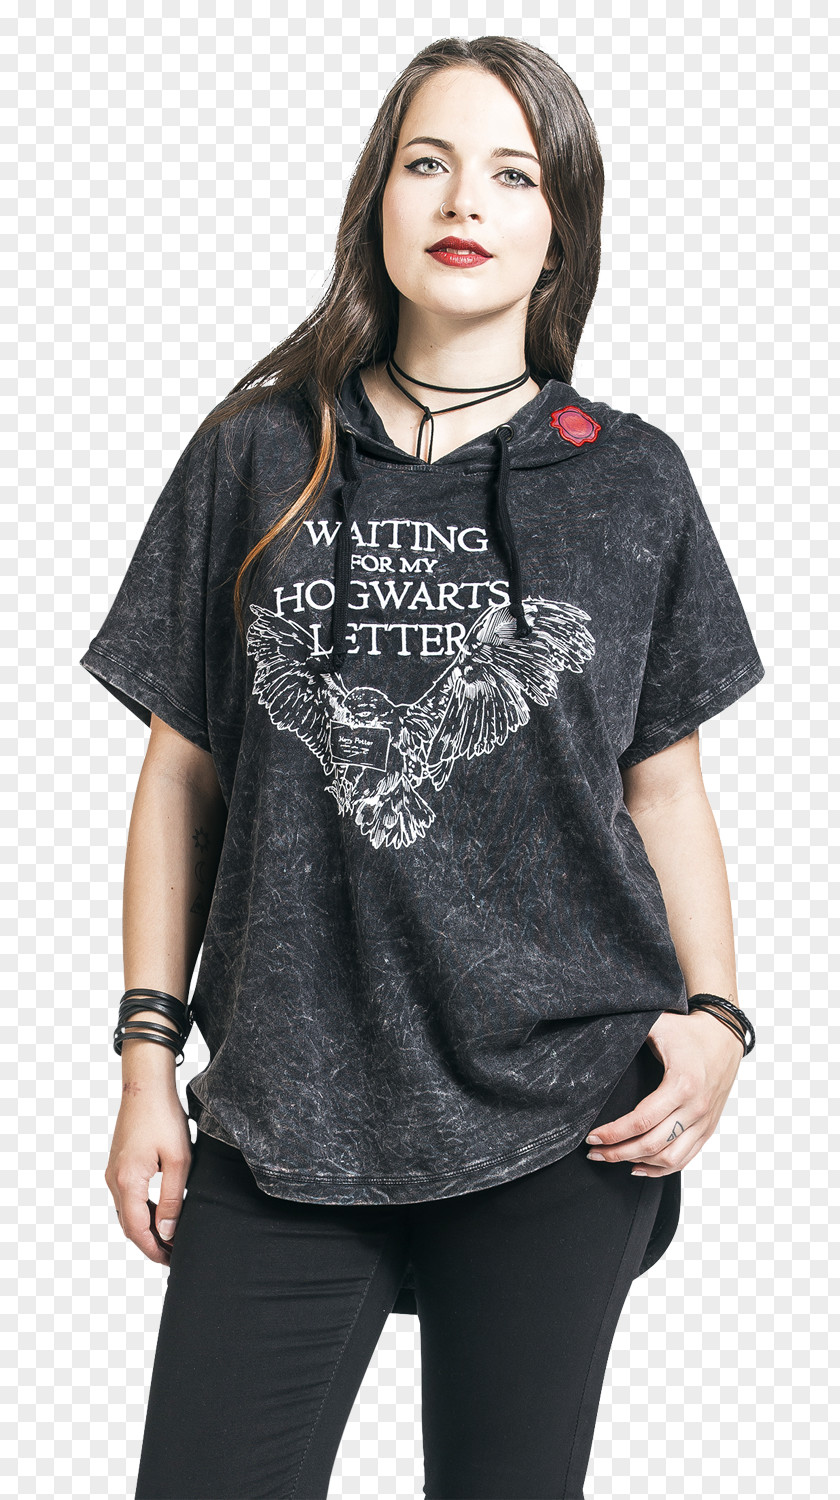 Harry Potter Fictional Universe Of T-shirt (Literary Series) Hogwarts School Witchcraft And Wizardry PNG